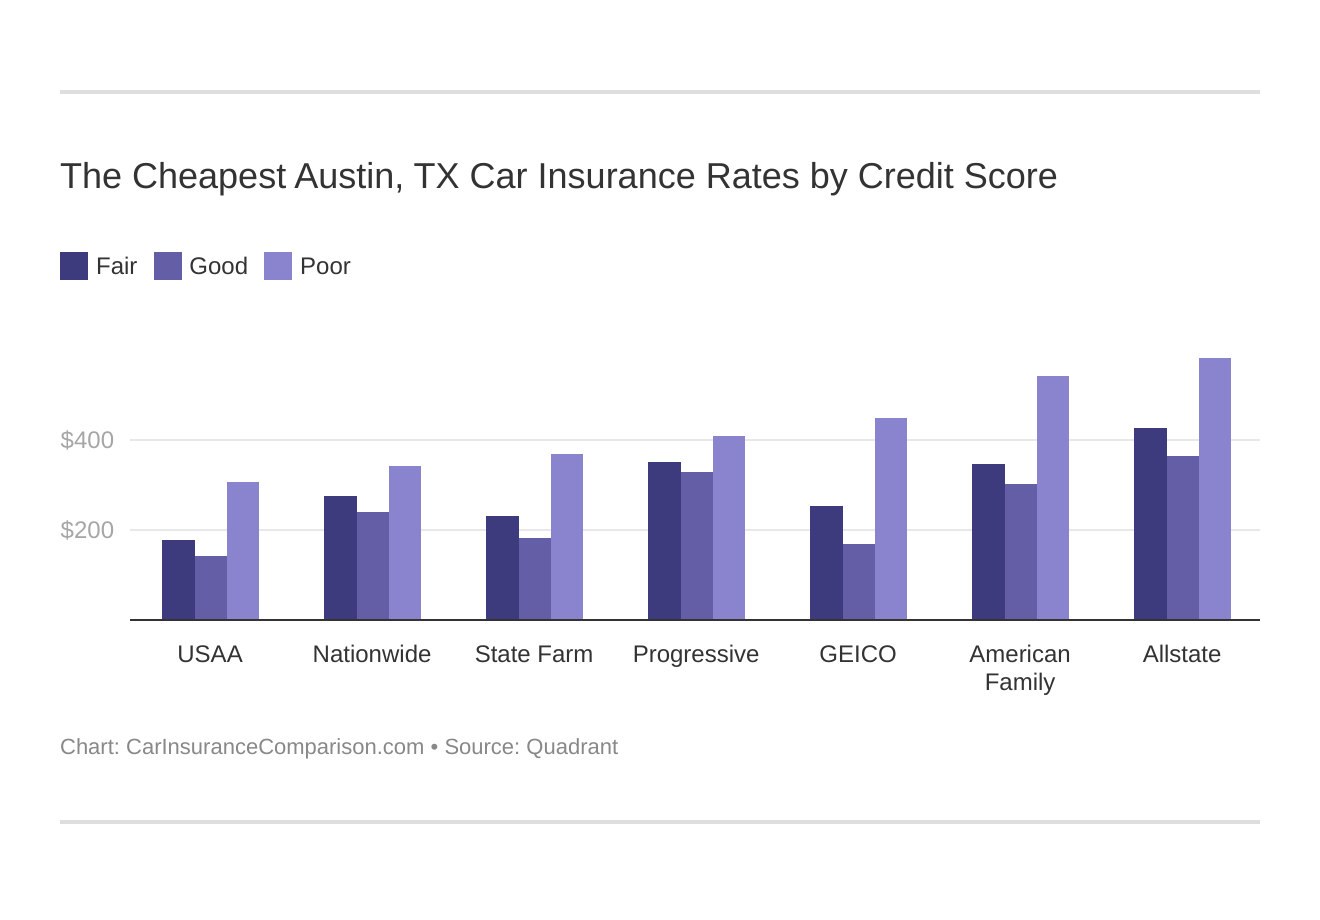 The Cheapest Austin, TX Car Insurance Rates by Credit Score